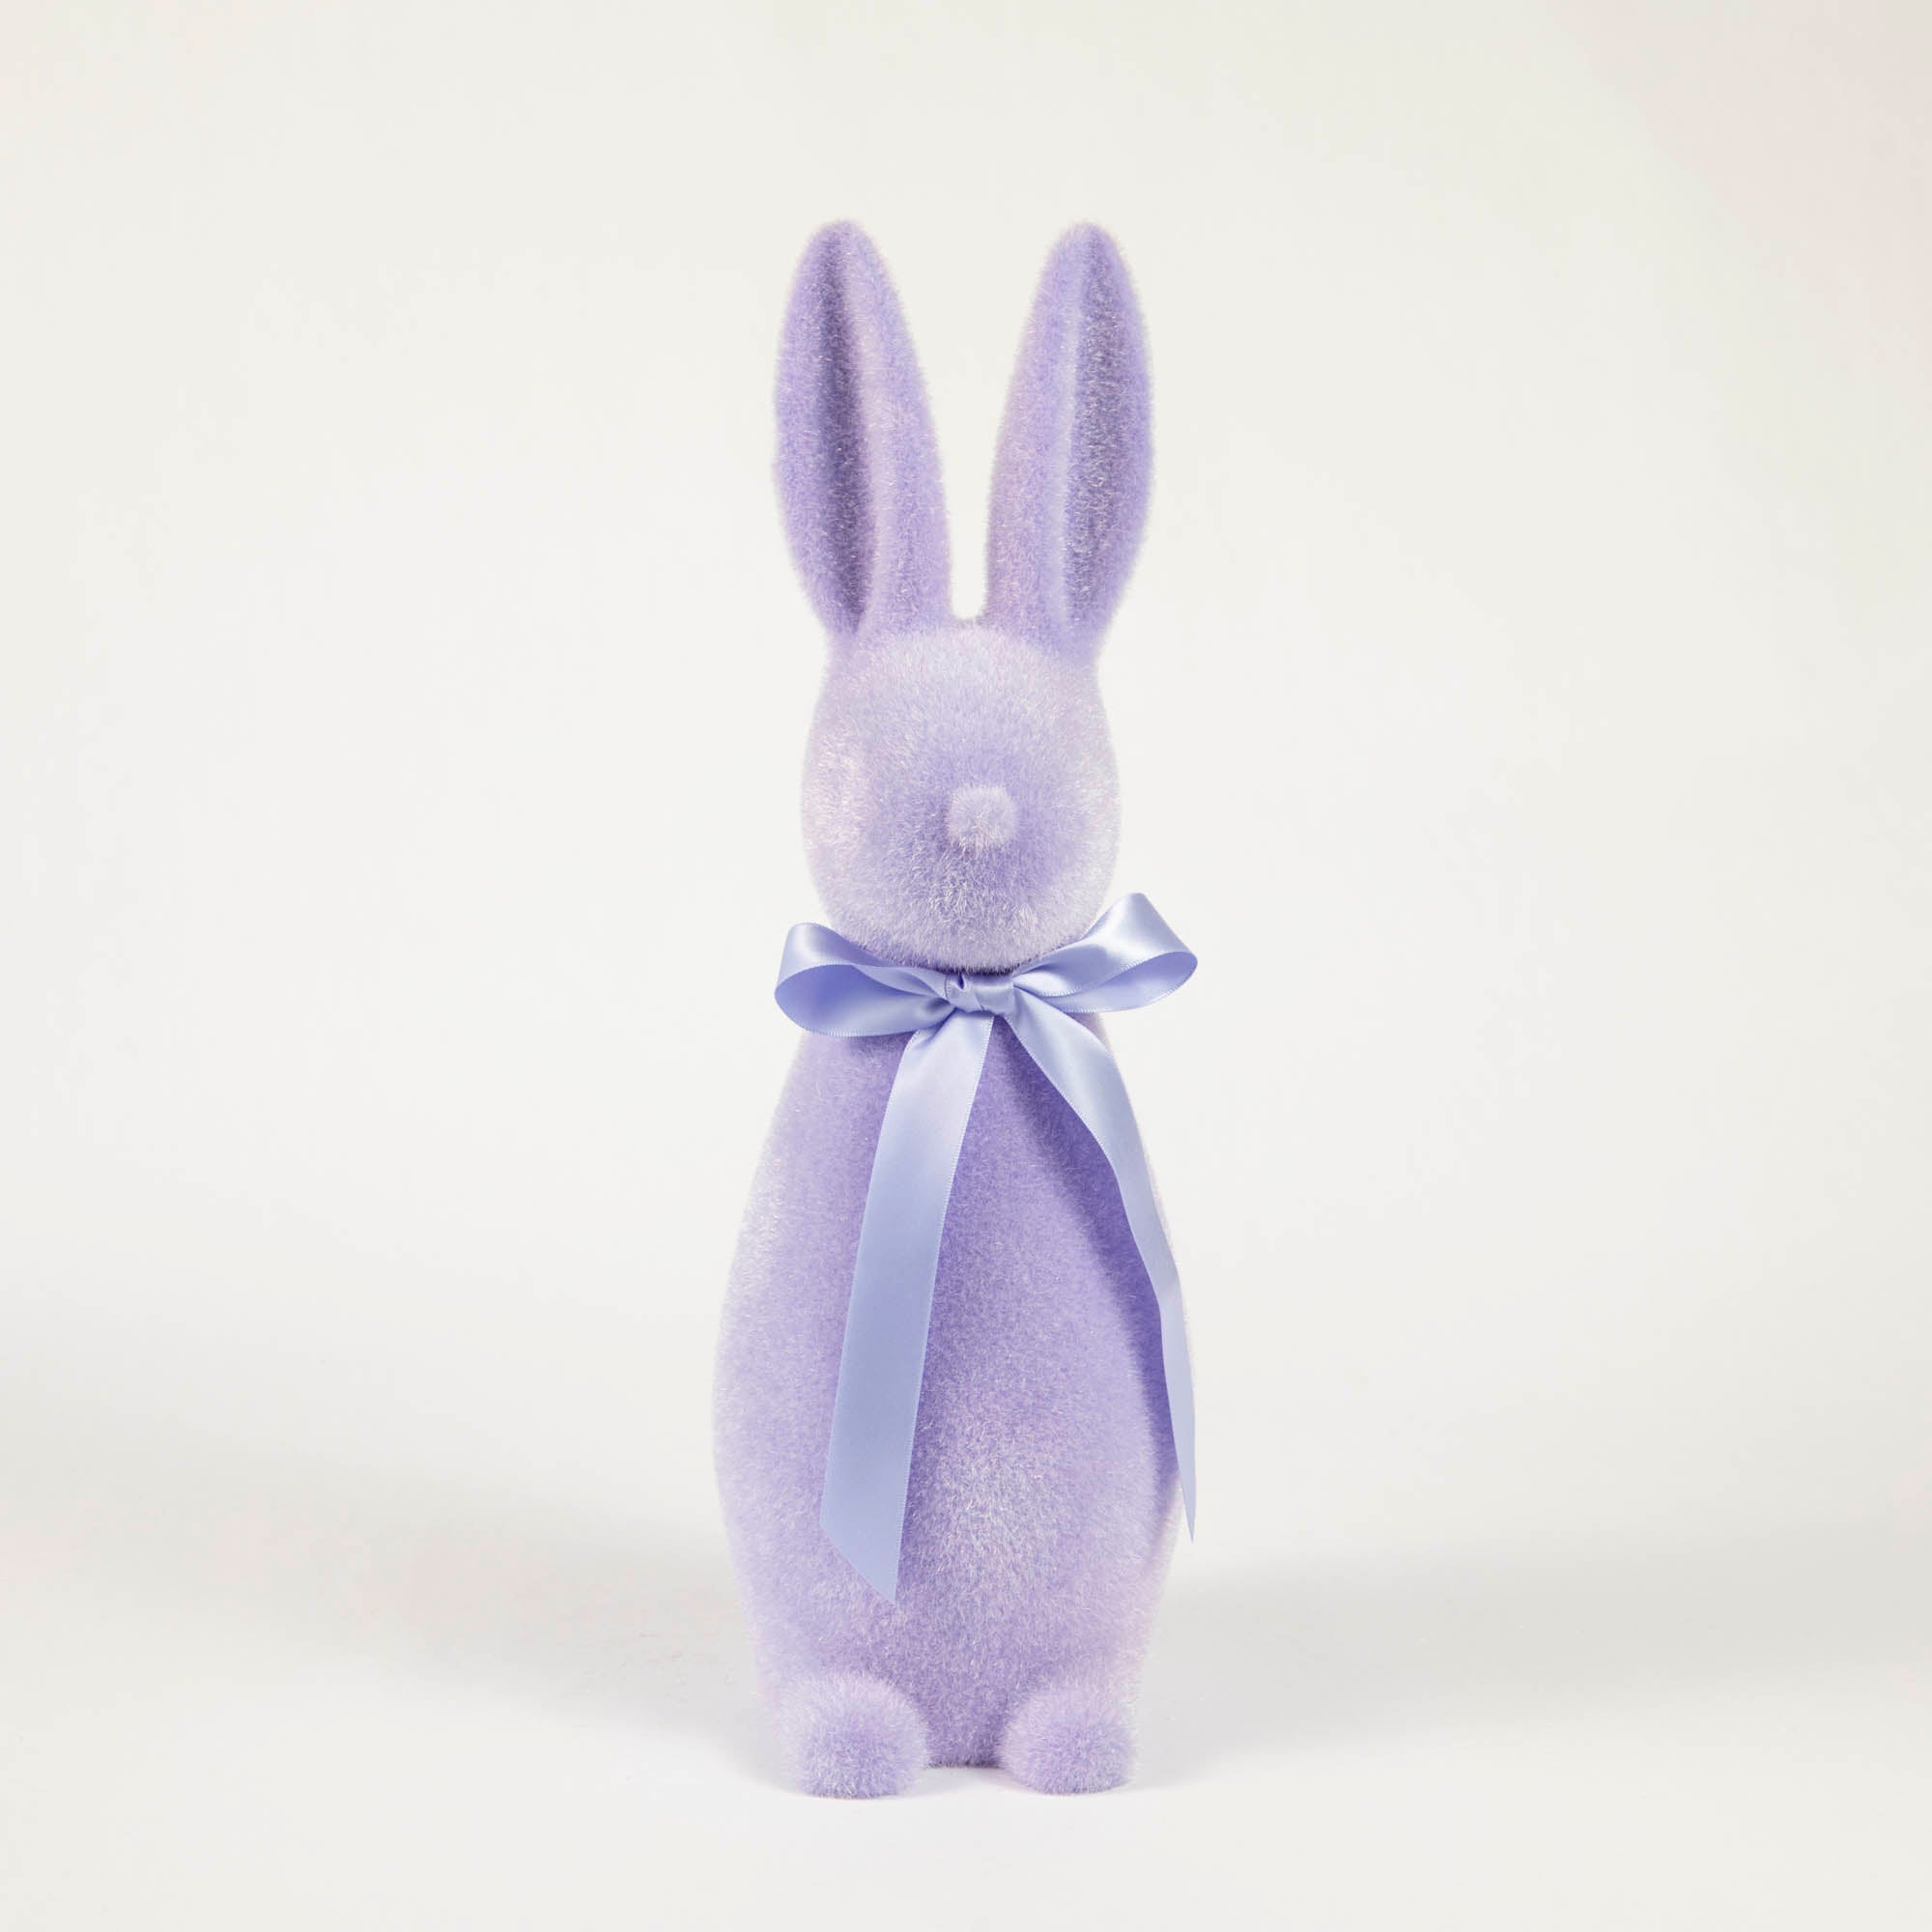 A Medium Flocked Button Nose Bunny, perfect for an Easter celebration gift, wearing a blue bow from Glitterville.